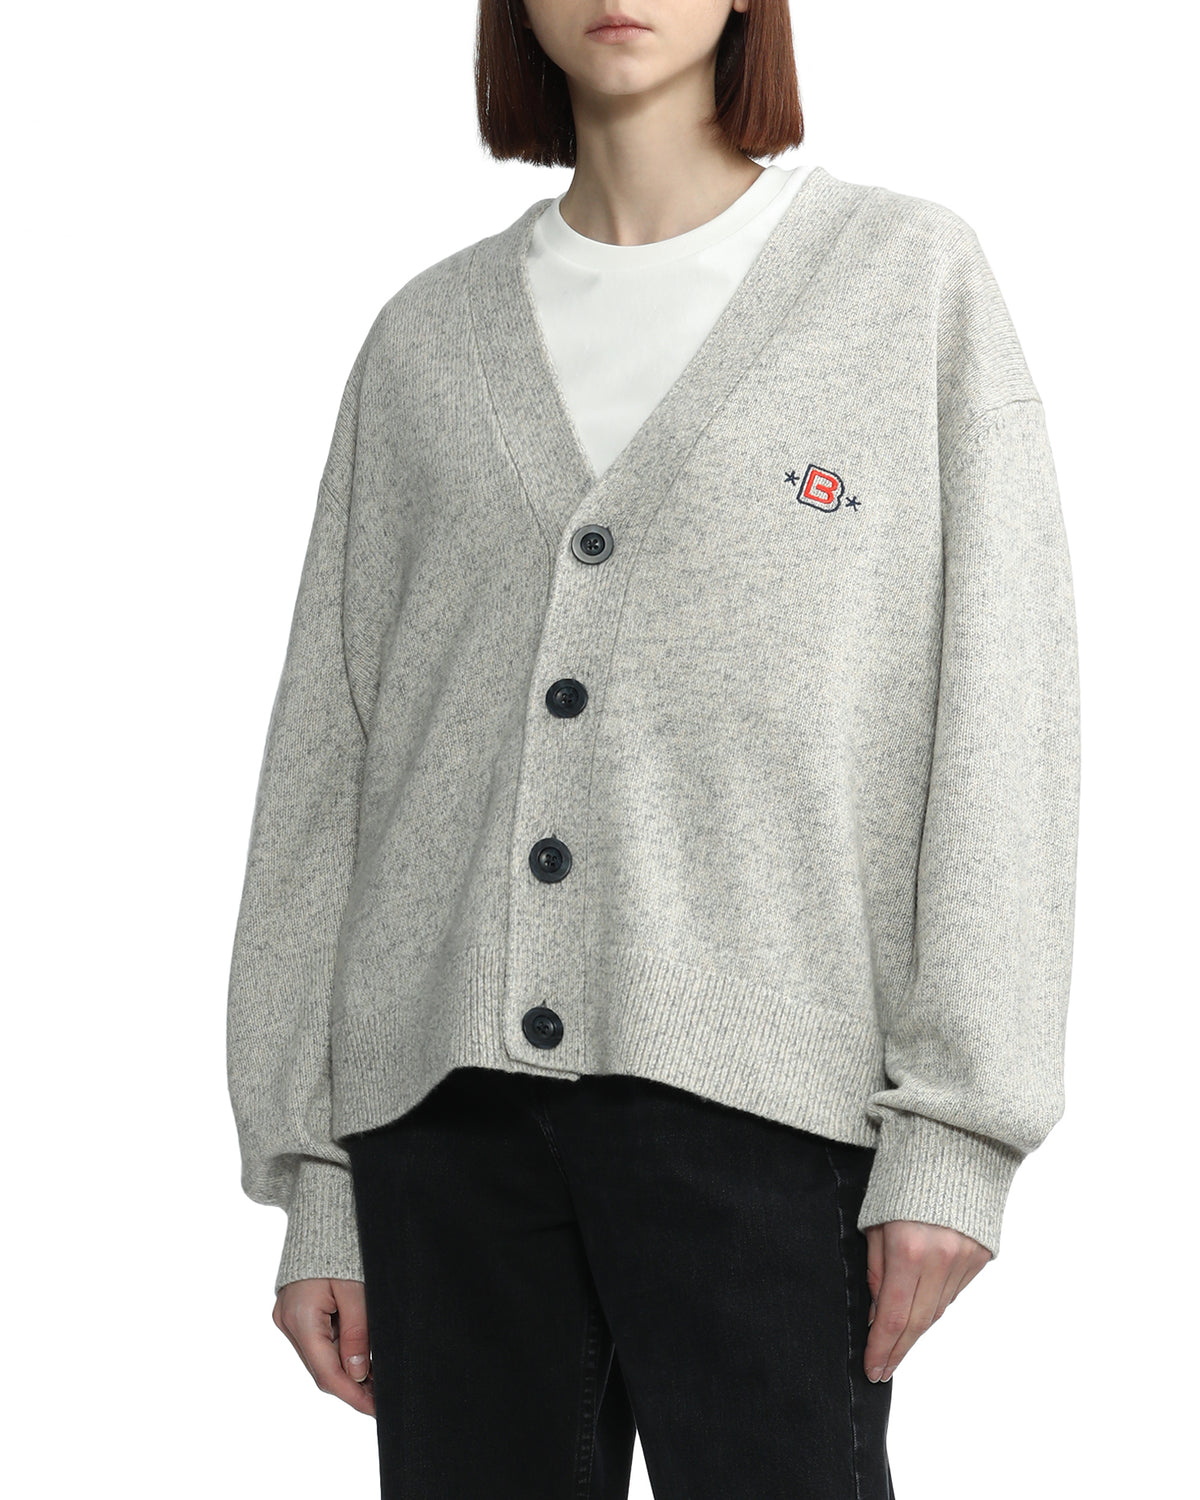 BAPY ONEPOINT CARDIGAN LADIES